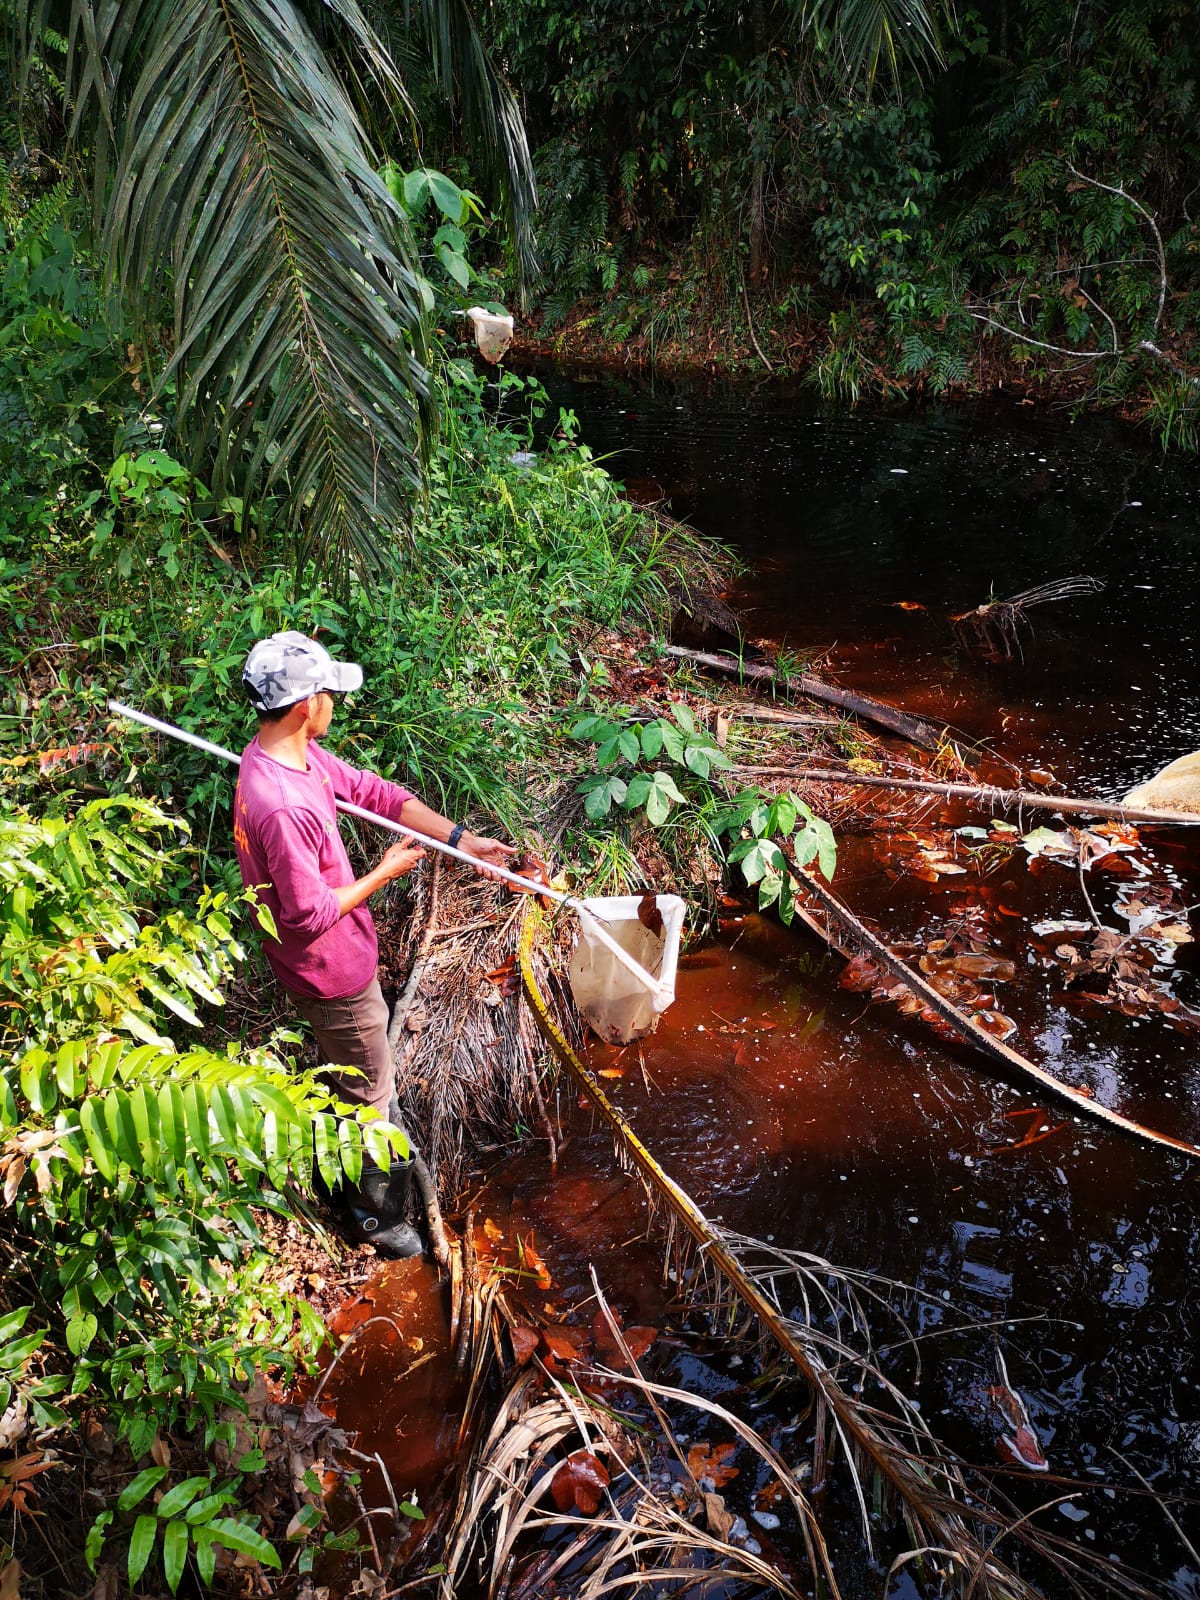 A photograph of a man with a net in a freshwater peat swamp forest in Southeast Asia.